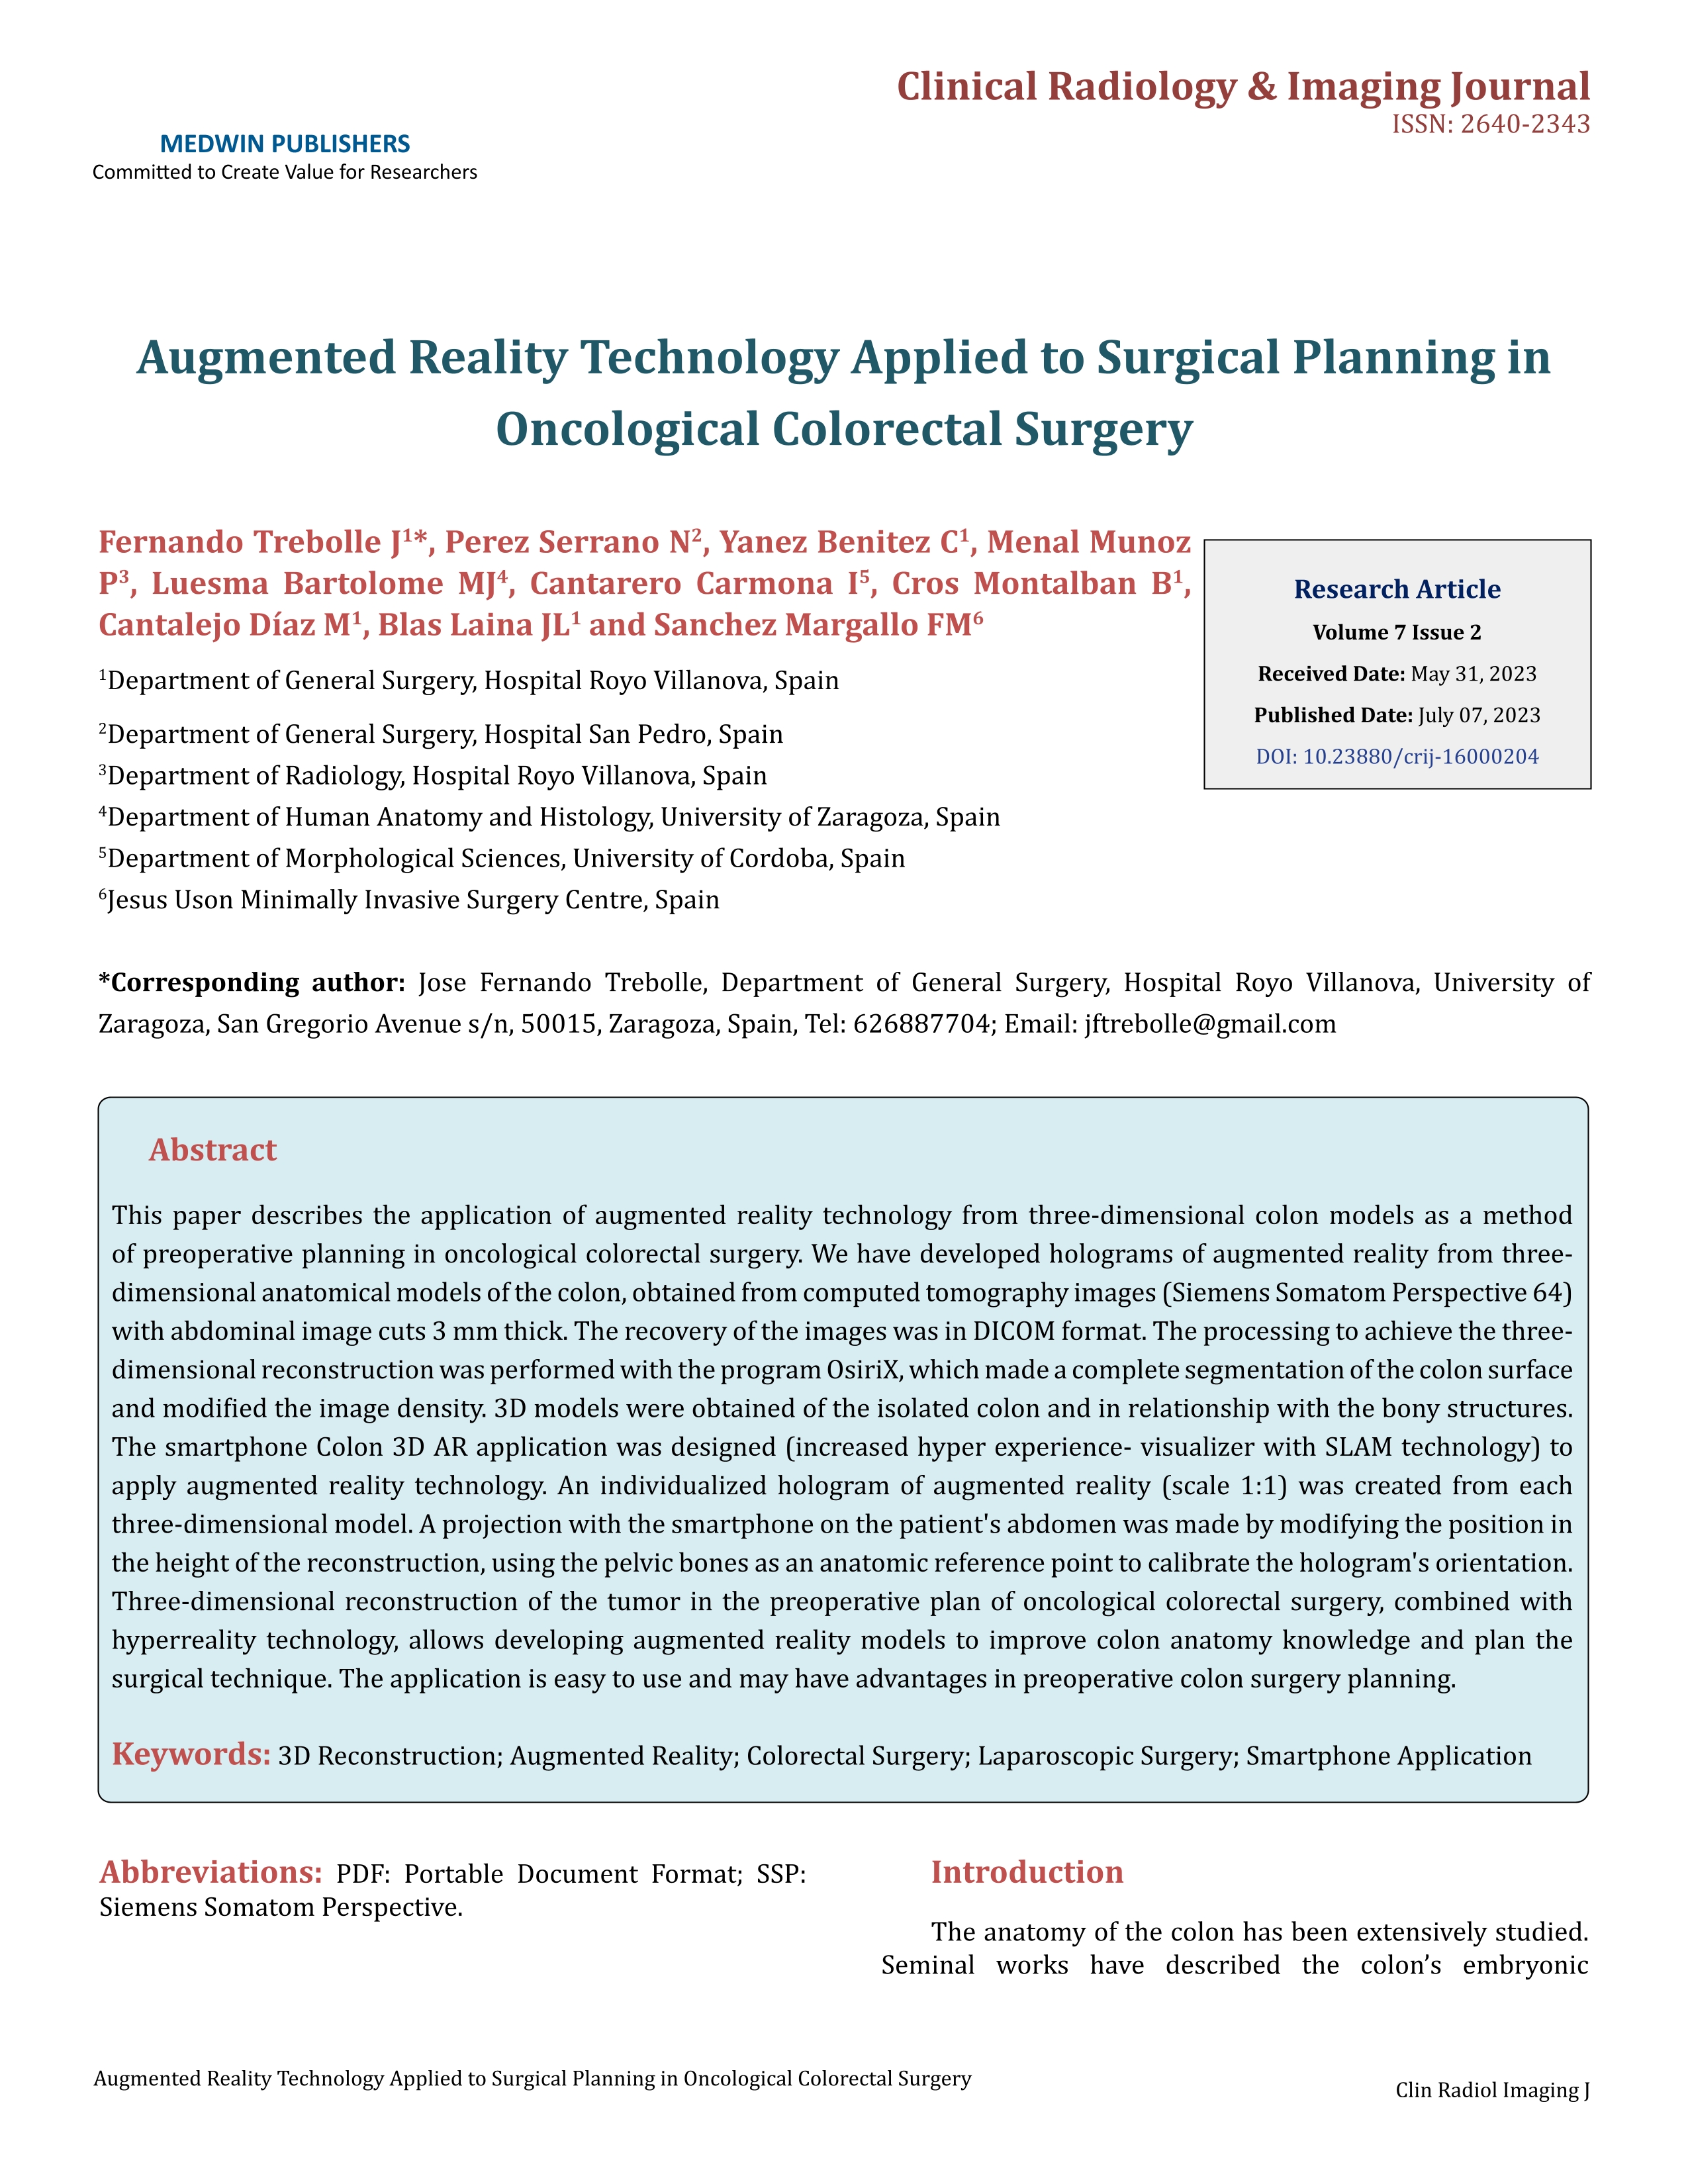 Augmented Reality Technology Applied to Surgical Planning in Oncological Colorectal Surgery